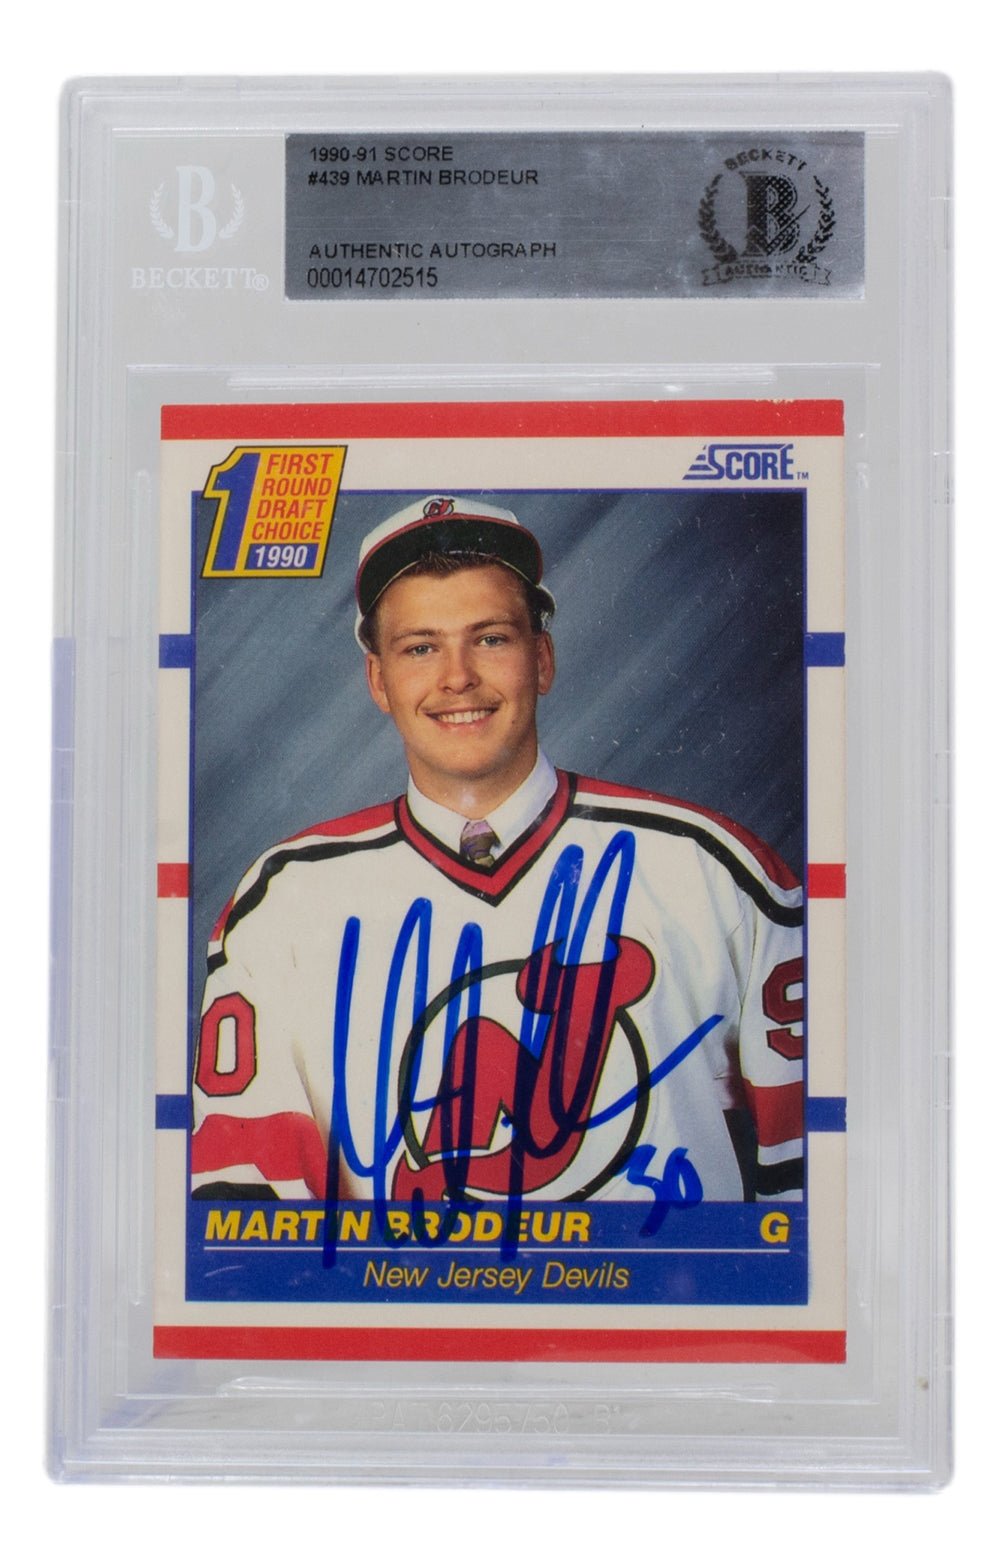 Martin Brodeur Signed 1990 Score Rookie Hockey Card #439- Auto